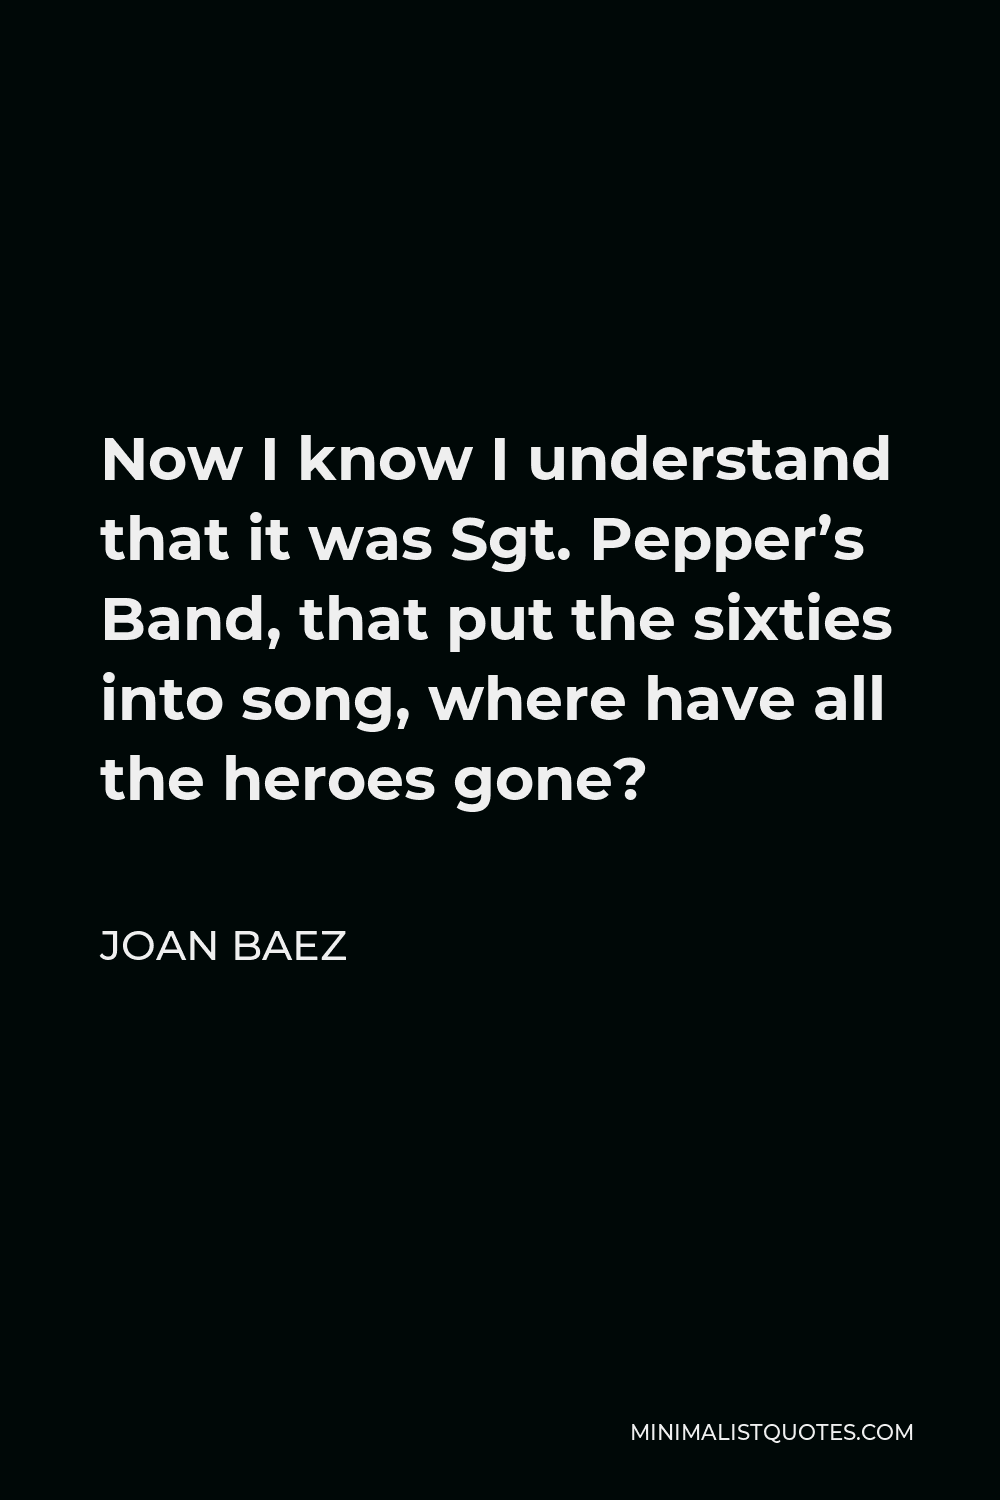 Joan Baez Quote - Now I know I understand that it was Sgt. Pepper’s Band, that put the sixties into song, where have all the heroes gone?